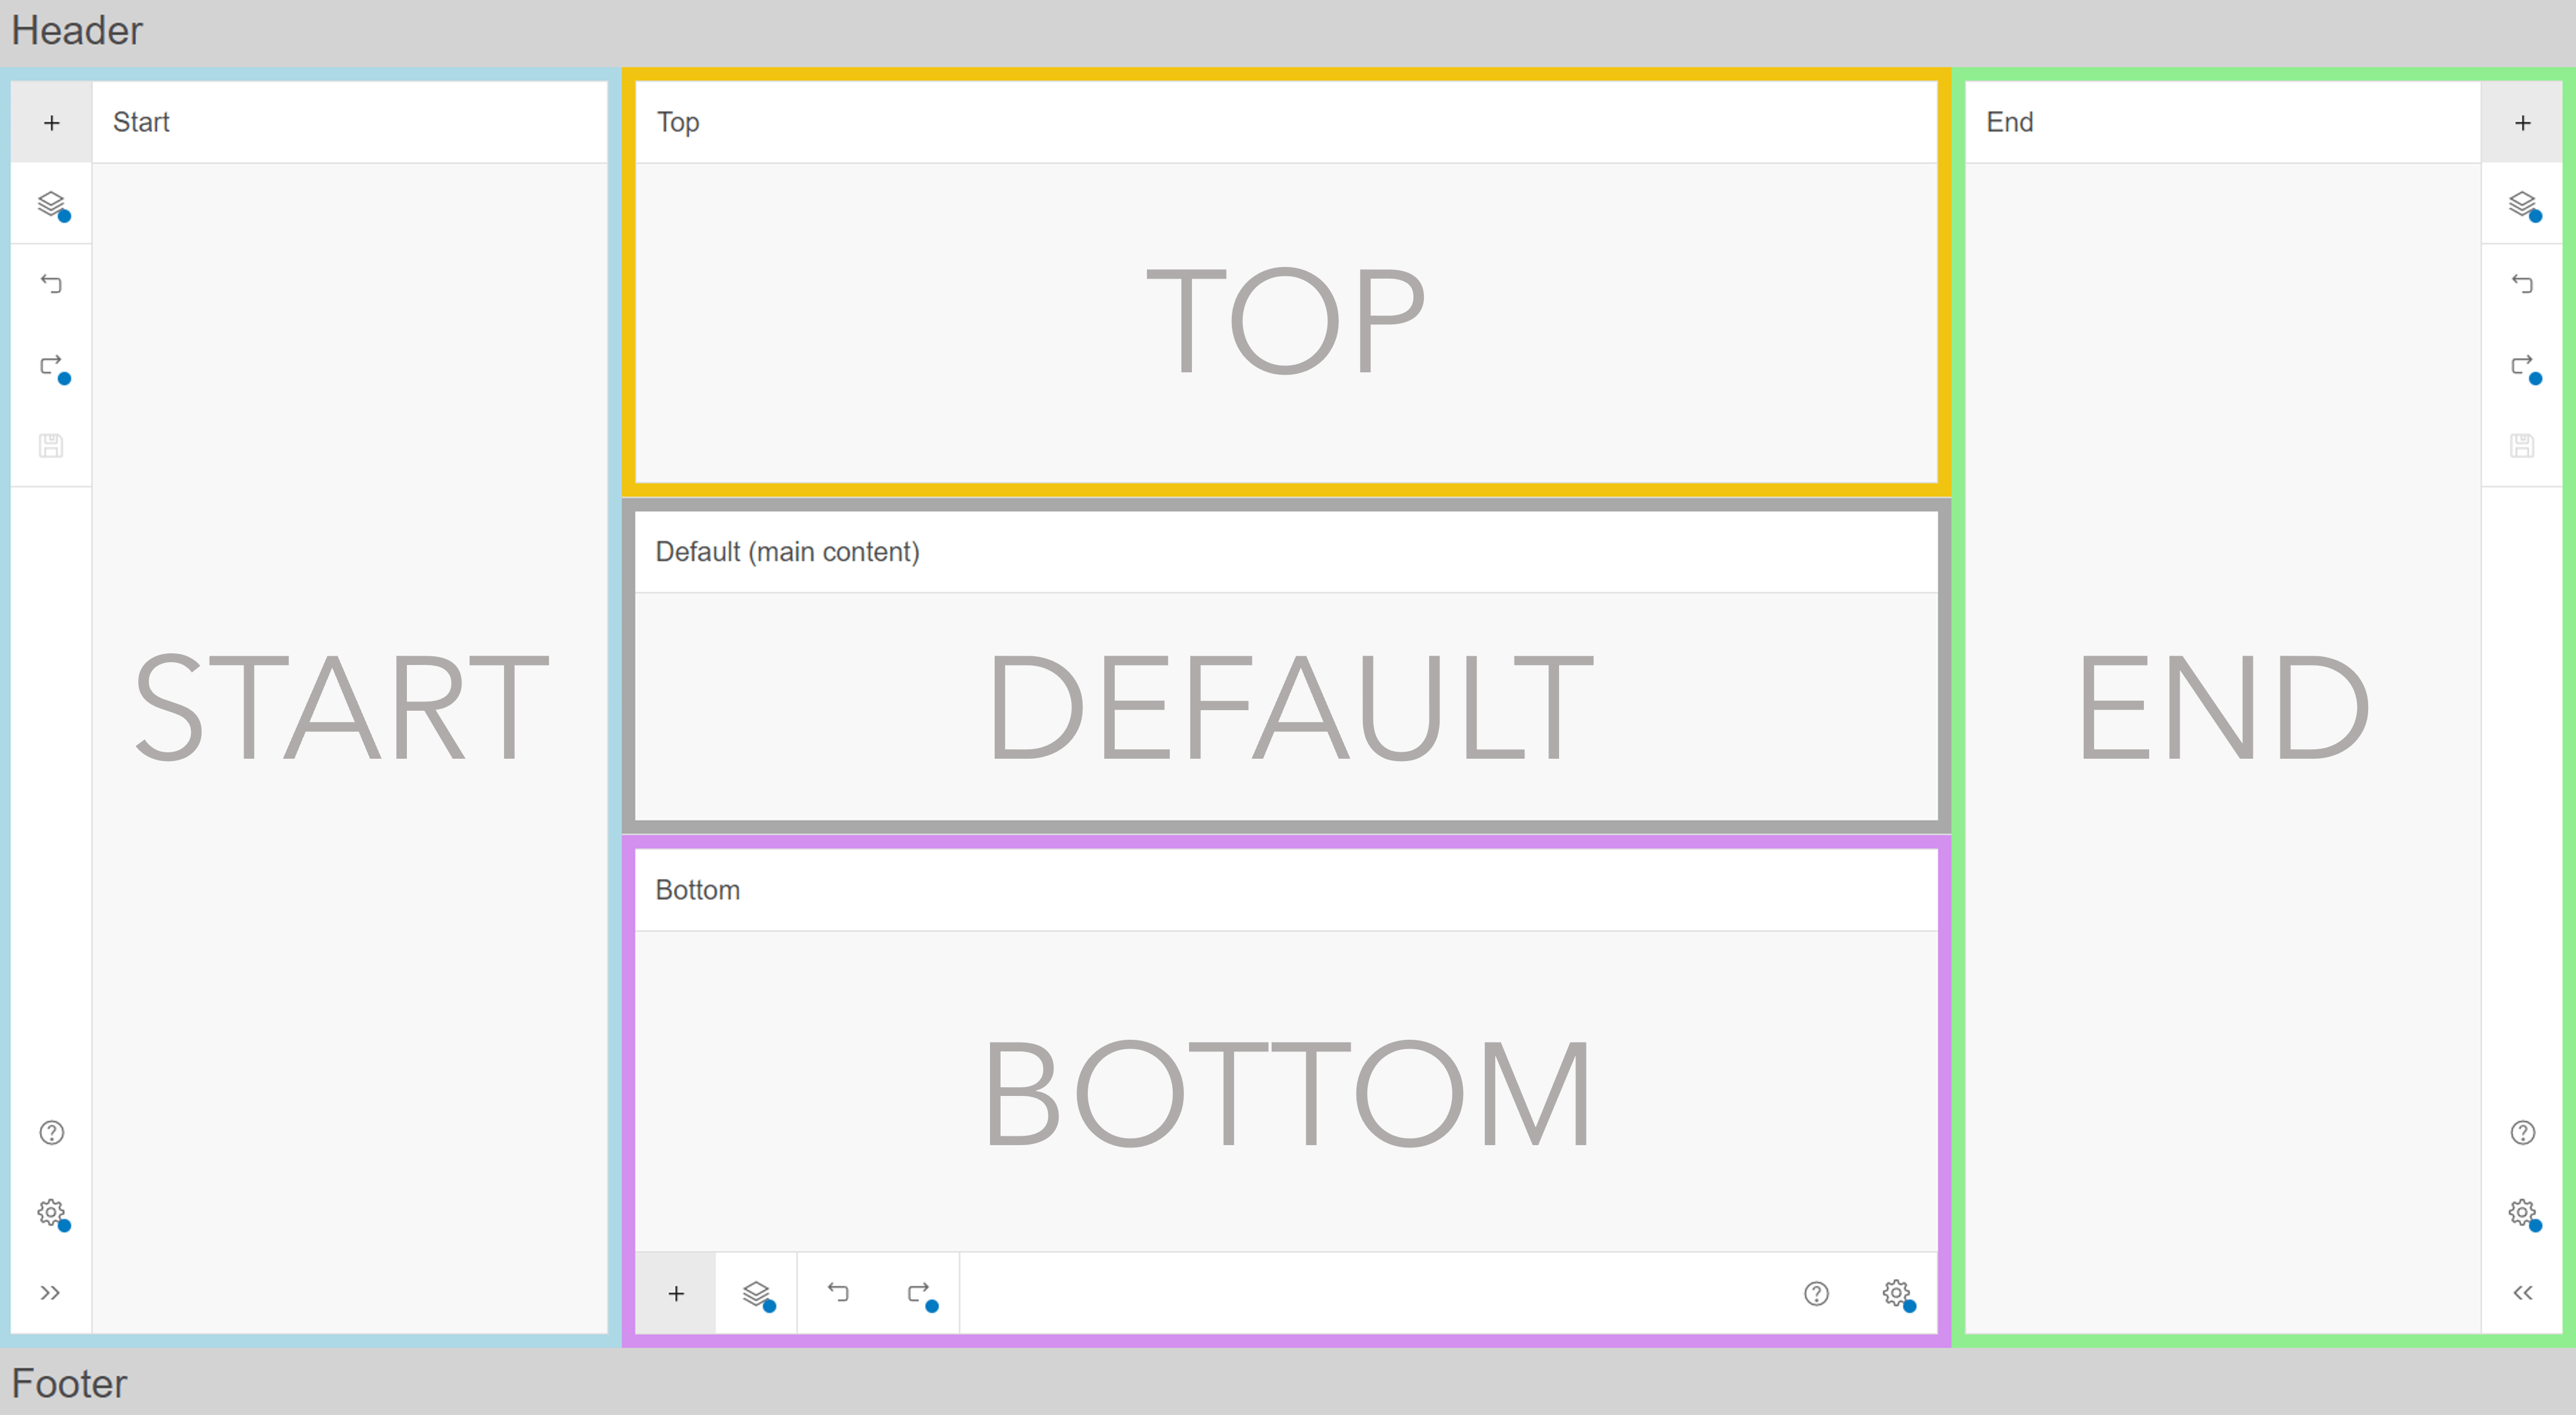 Shell is a foundational layout component as it organizes the overall layout of your app, such as the start, end, top, default, and bottom slots.